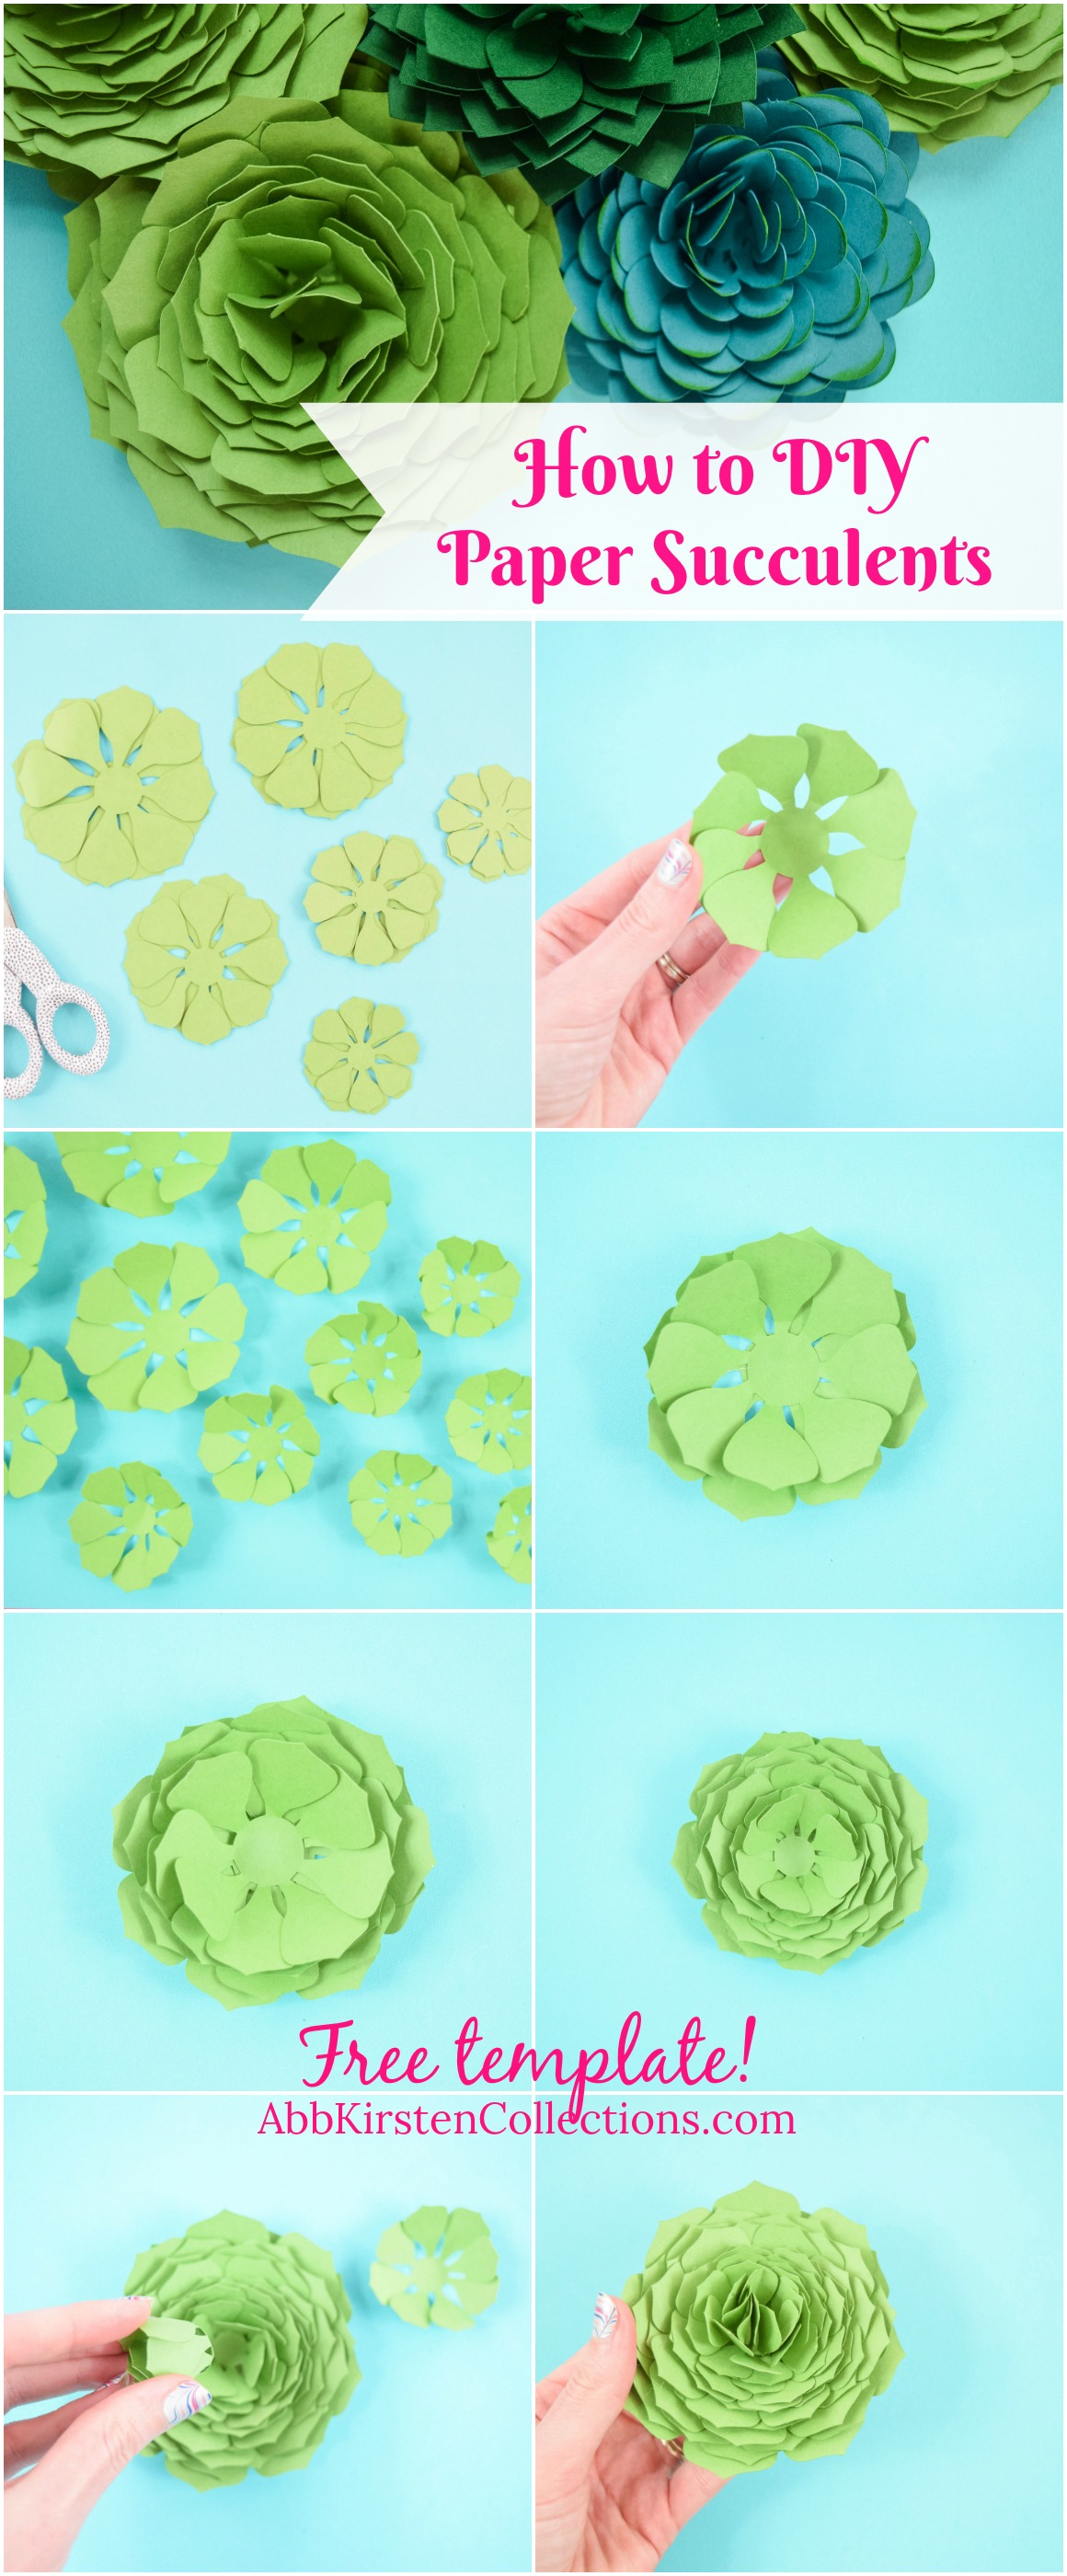 Paper Succulent Template: How to Make Paper Succulent Flowers